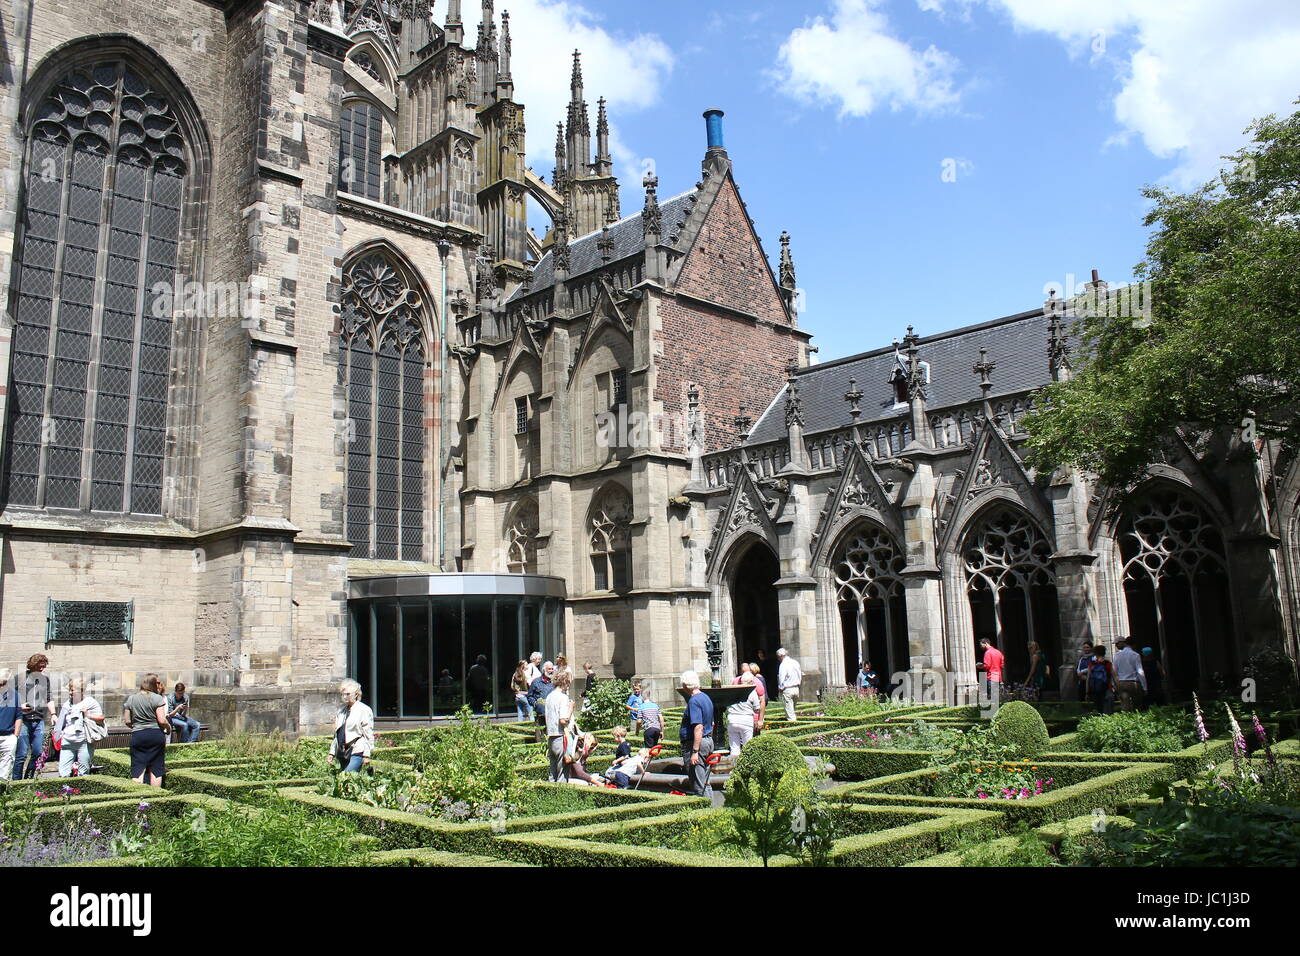 Botanical gardens and inner courtyard (Pandhof) of the Gothic Dom church or St. Martin's Cathedral, Utrecht, The Netherlands Stock Photo